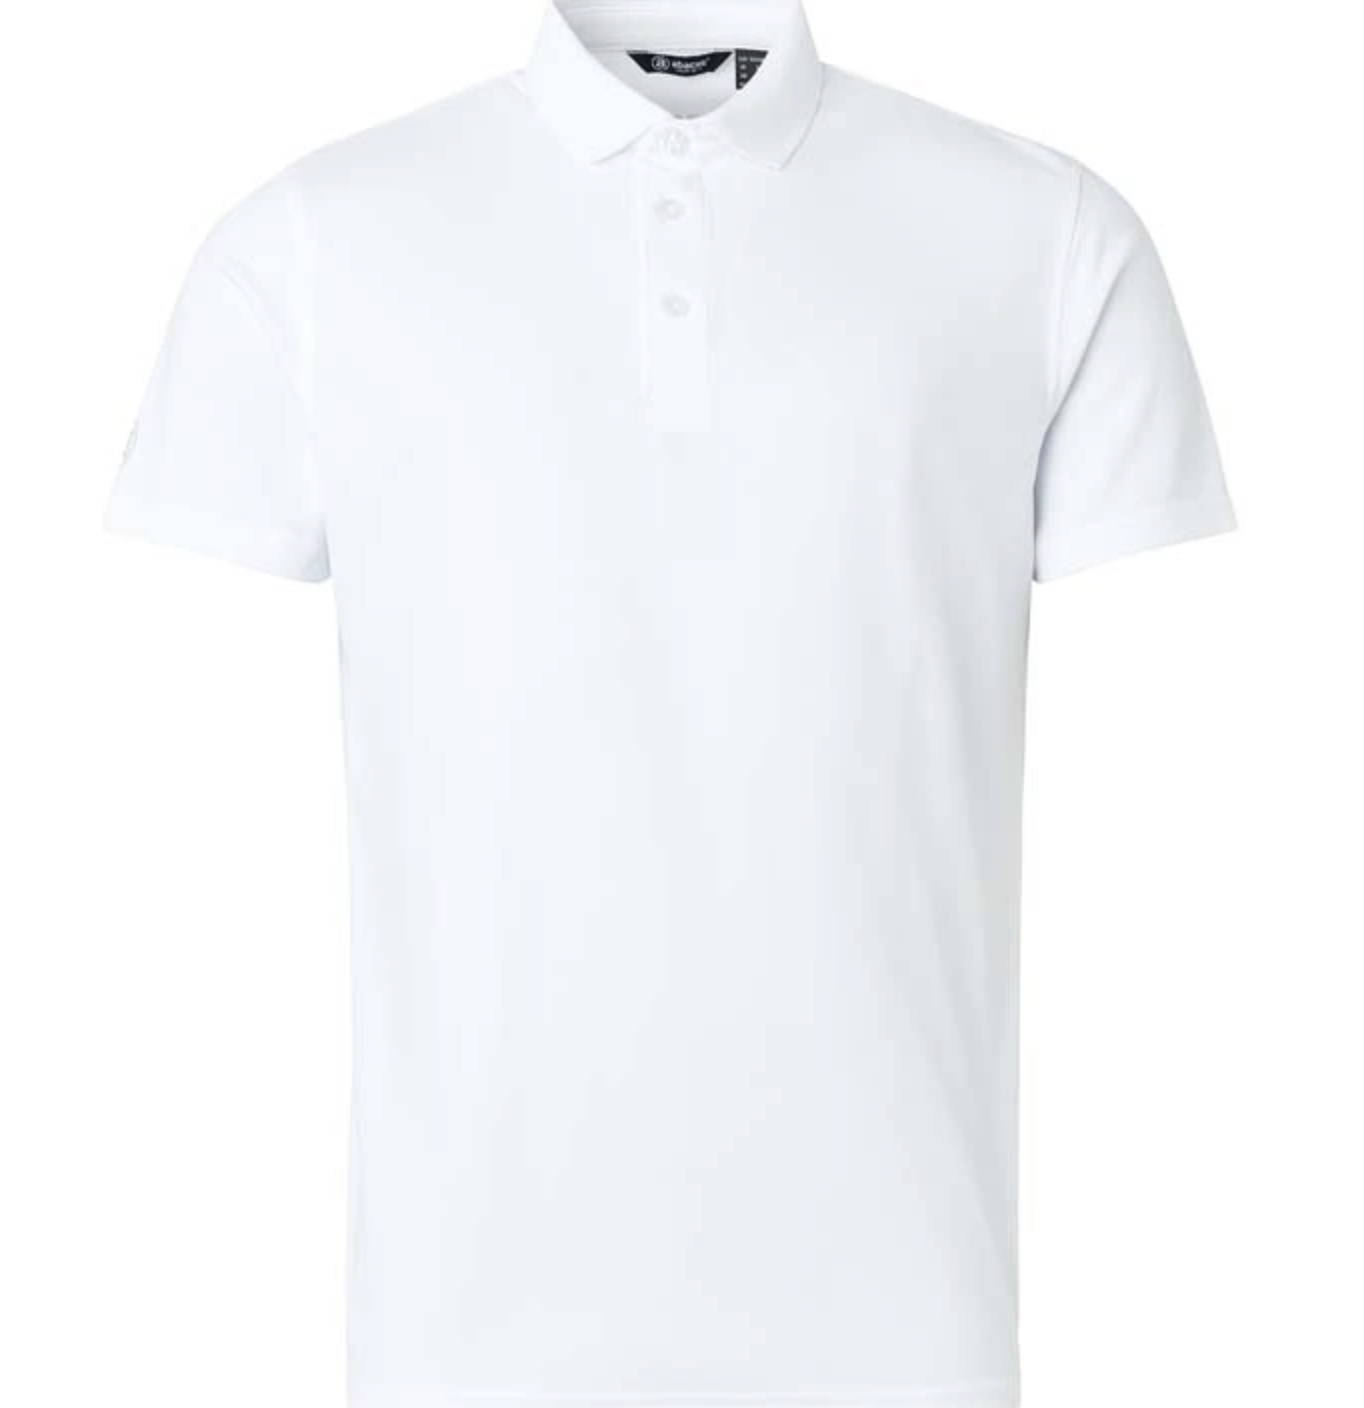 Abacus | 6724-100 | Cray Drycool Polo | White